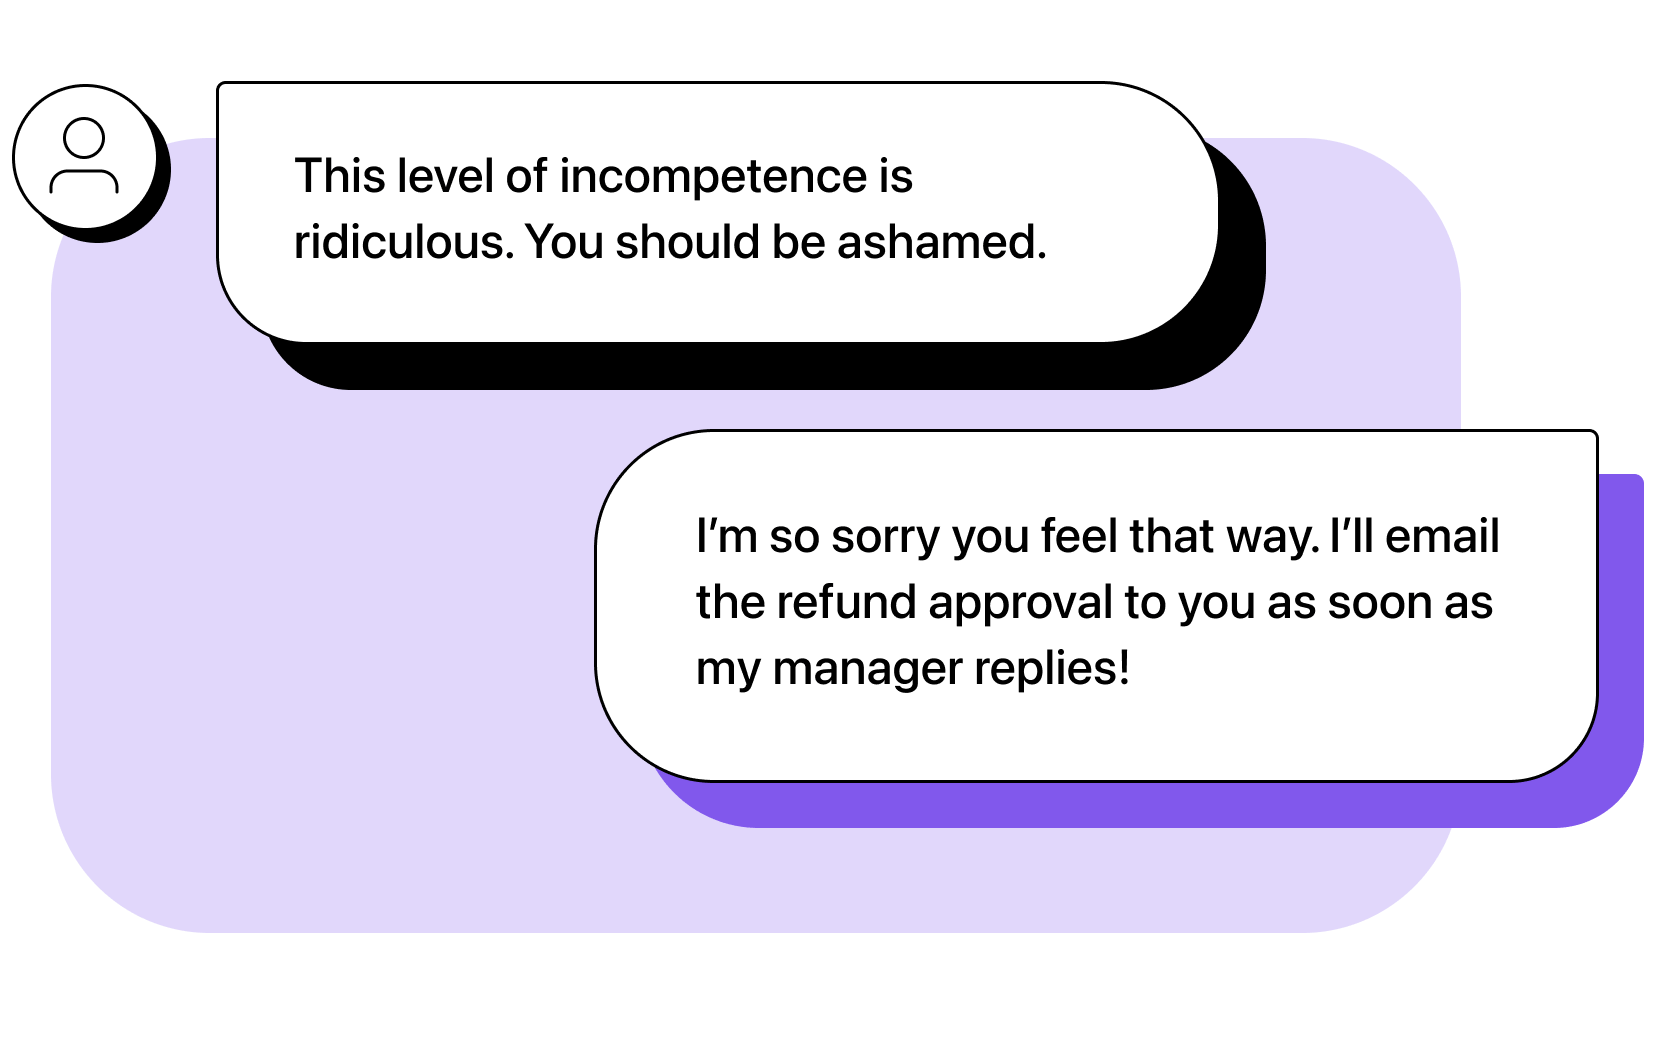 Customer: This level of incompetence is ridiculous. You should be ashamed. Agent: I’m so sorry you feel that way. I’ll email the refund approval to you as soon as my manager replies!